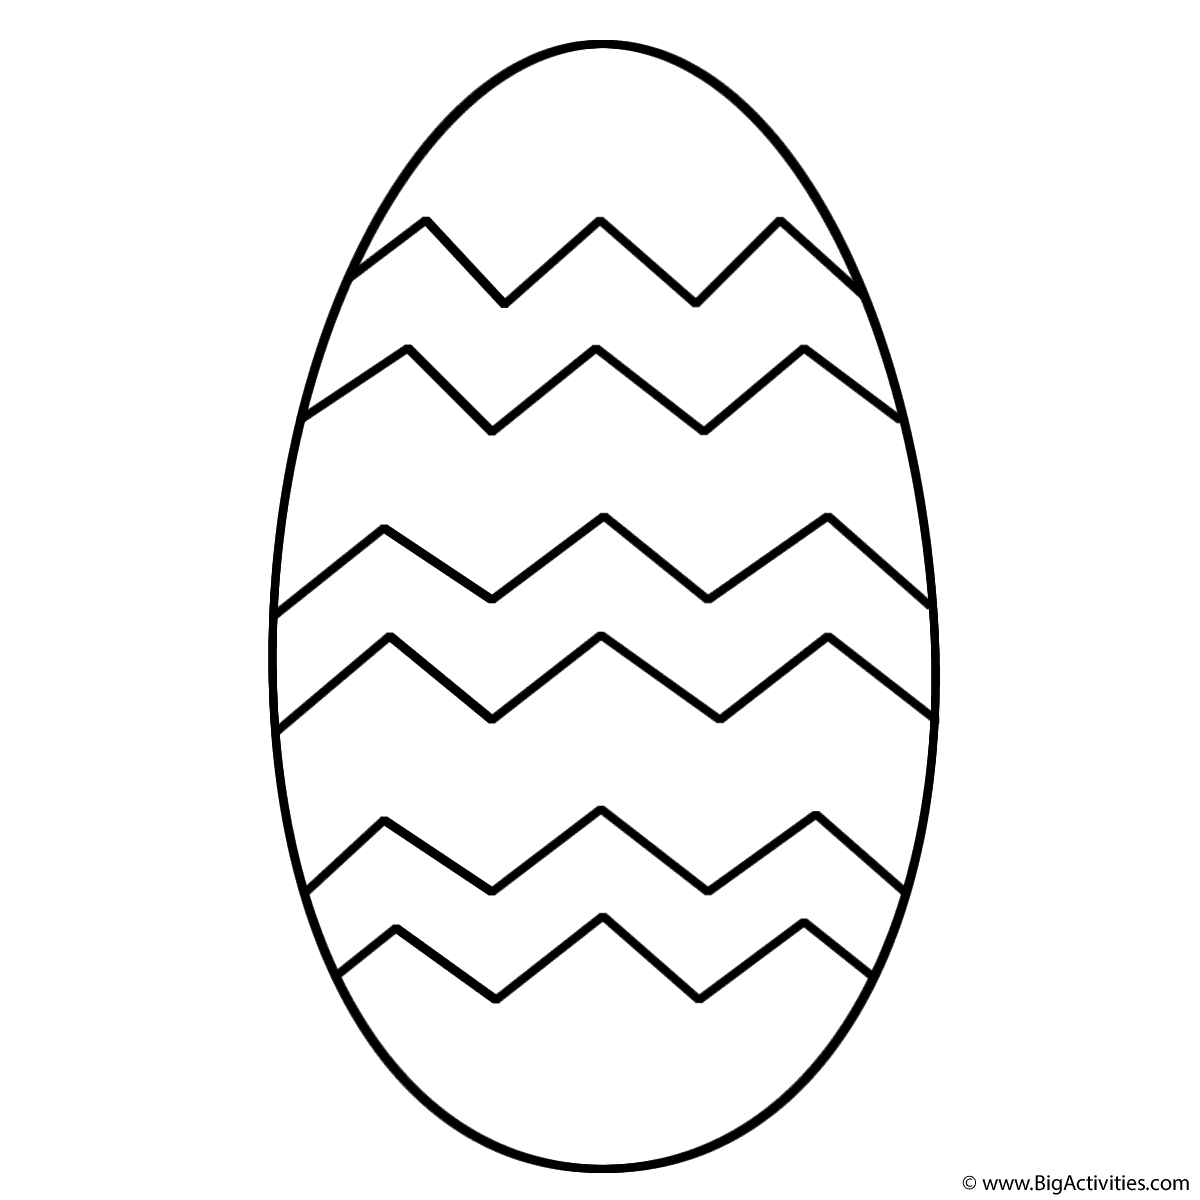 Easter Egg with patterns - Coloring Page (Easter)